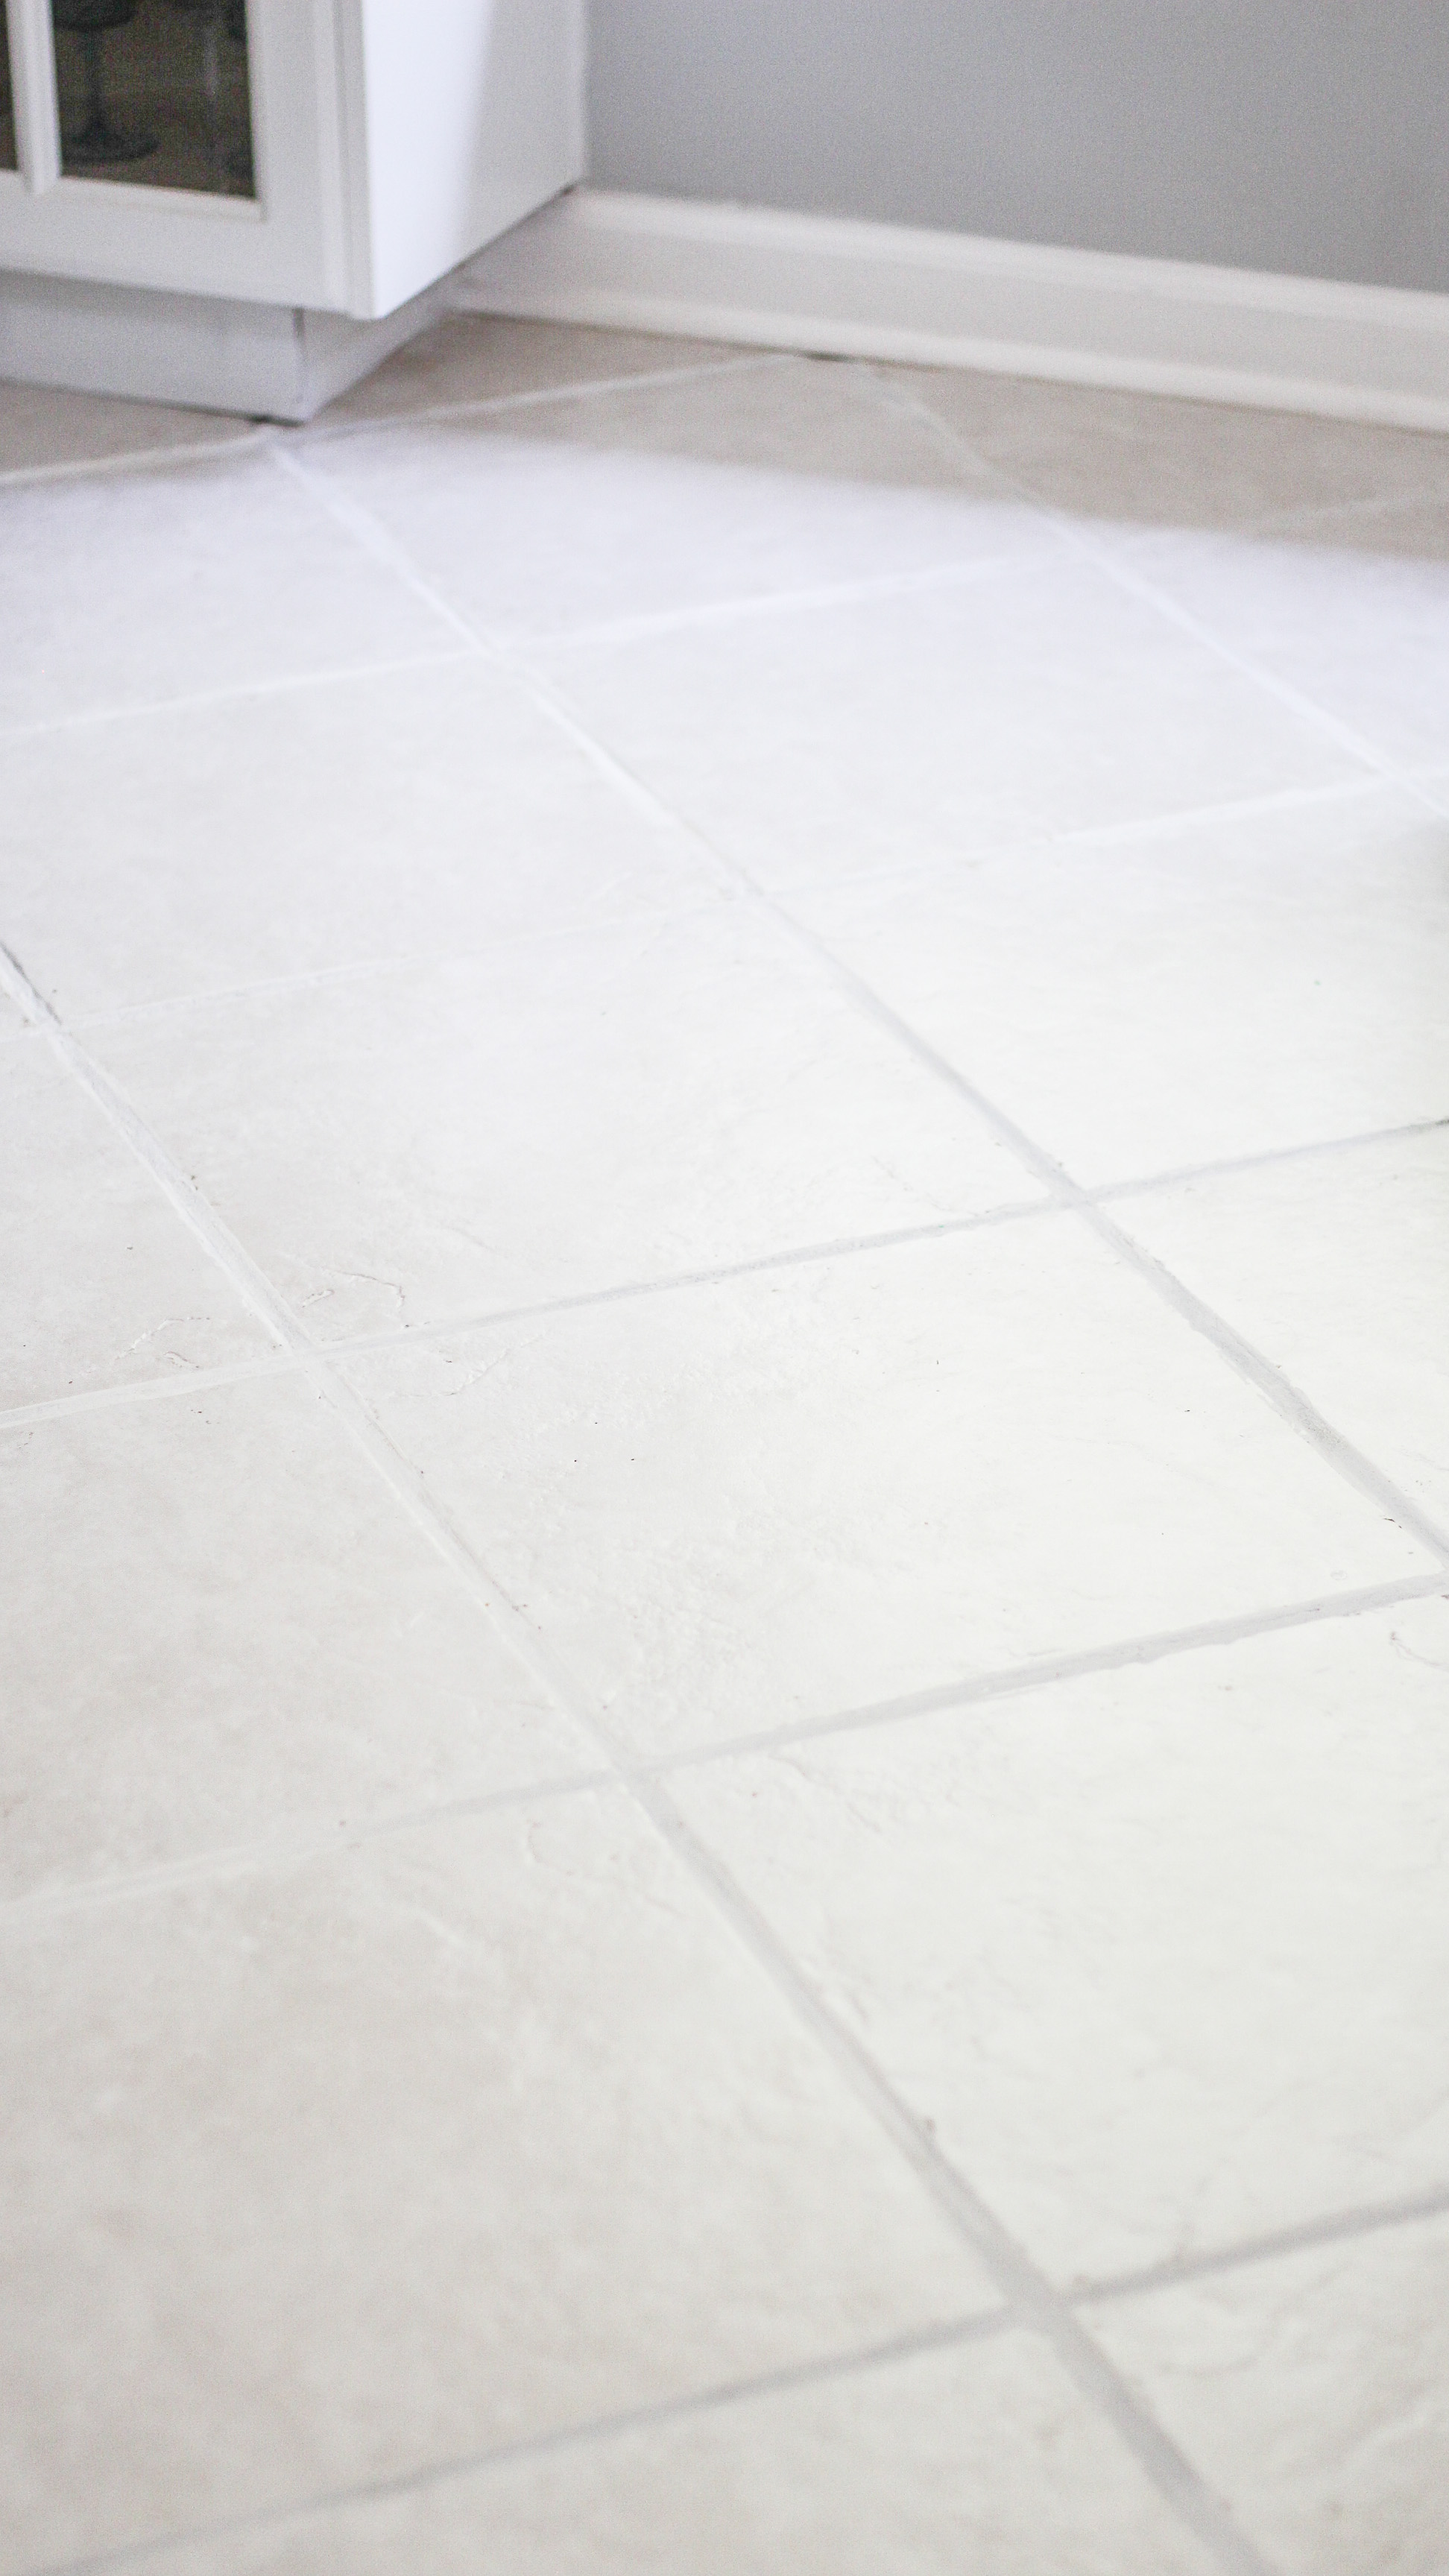 Neglected Tile Flooring, How To Clean Old Stained Tile Floors